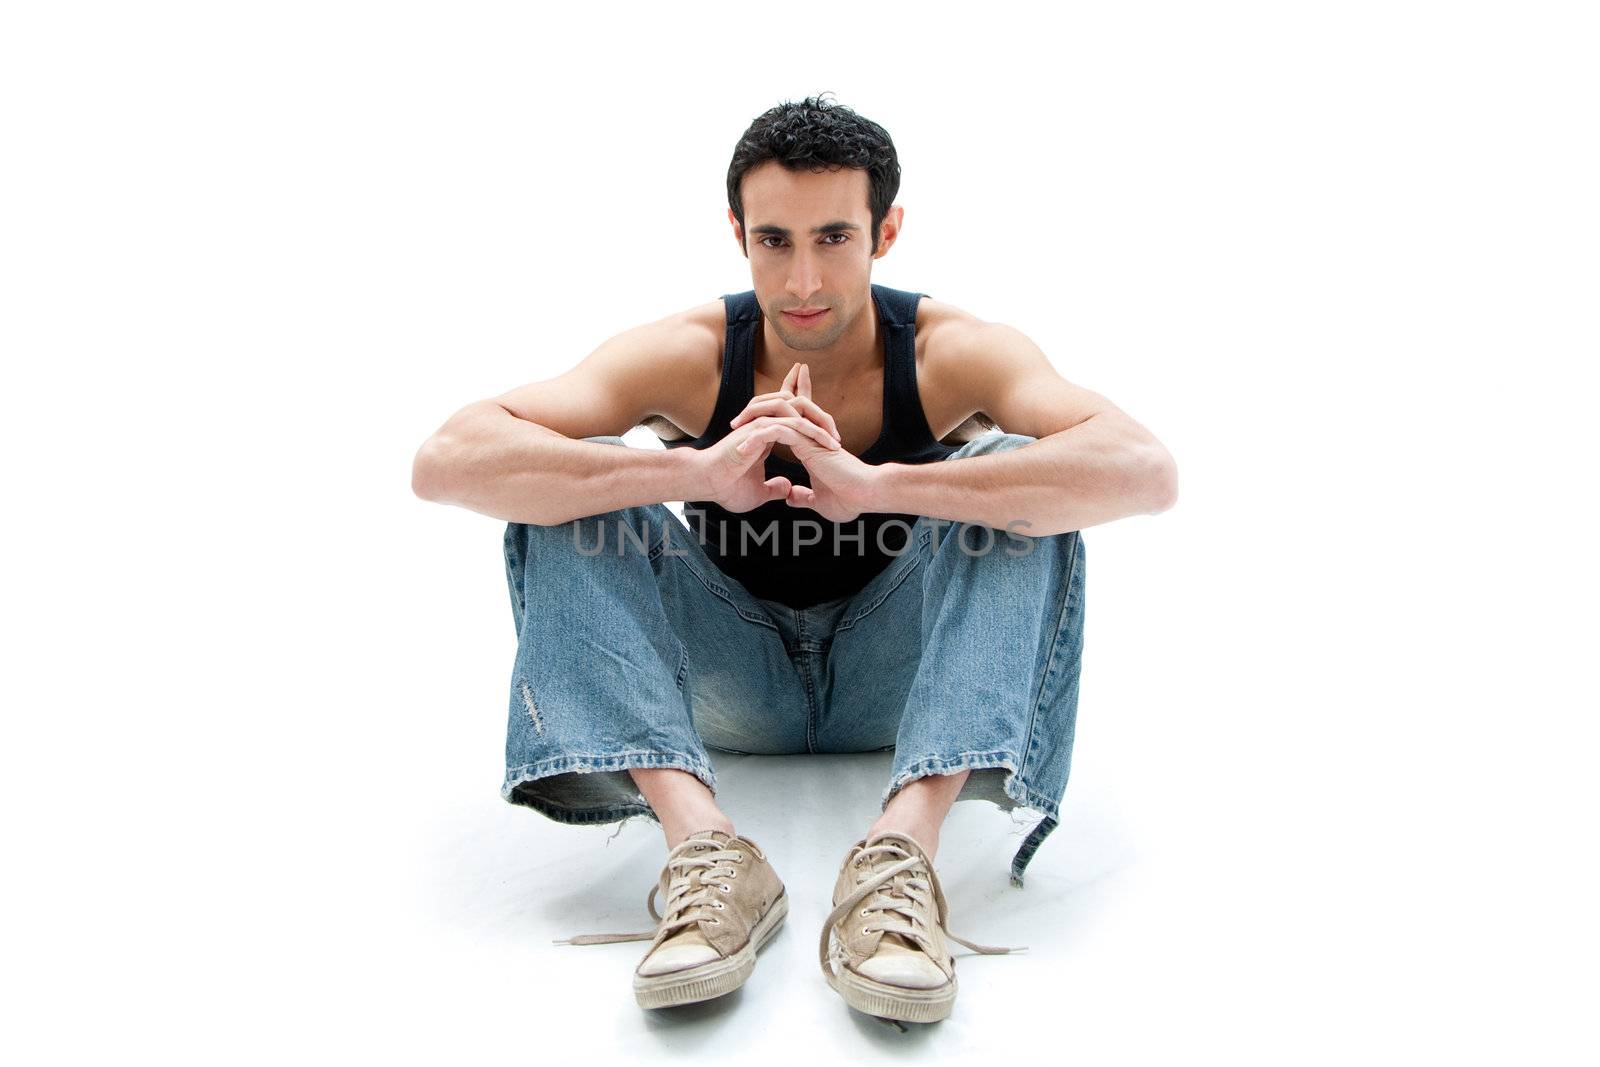 Handsome Caucasian guy wearing black tank top and jeans sitting on floor thinking, isolated